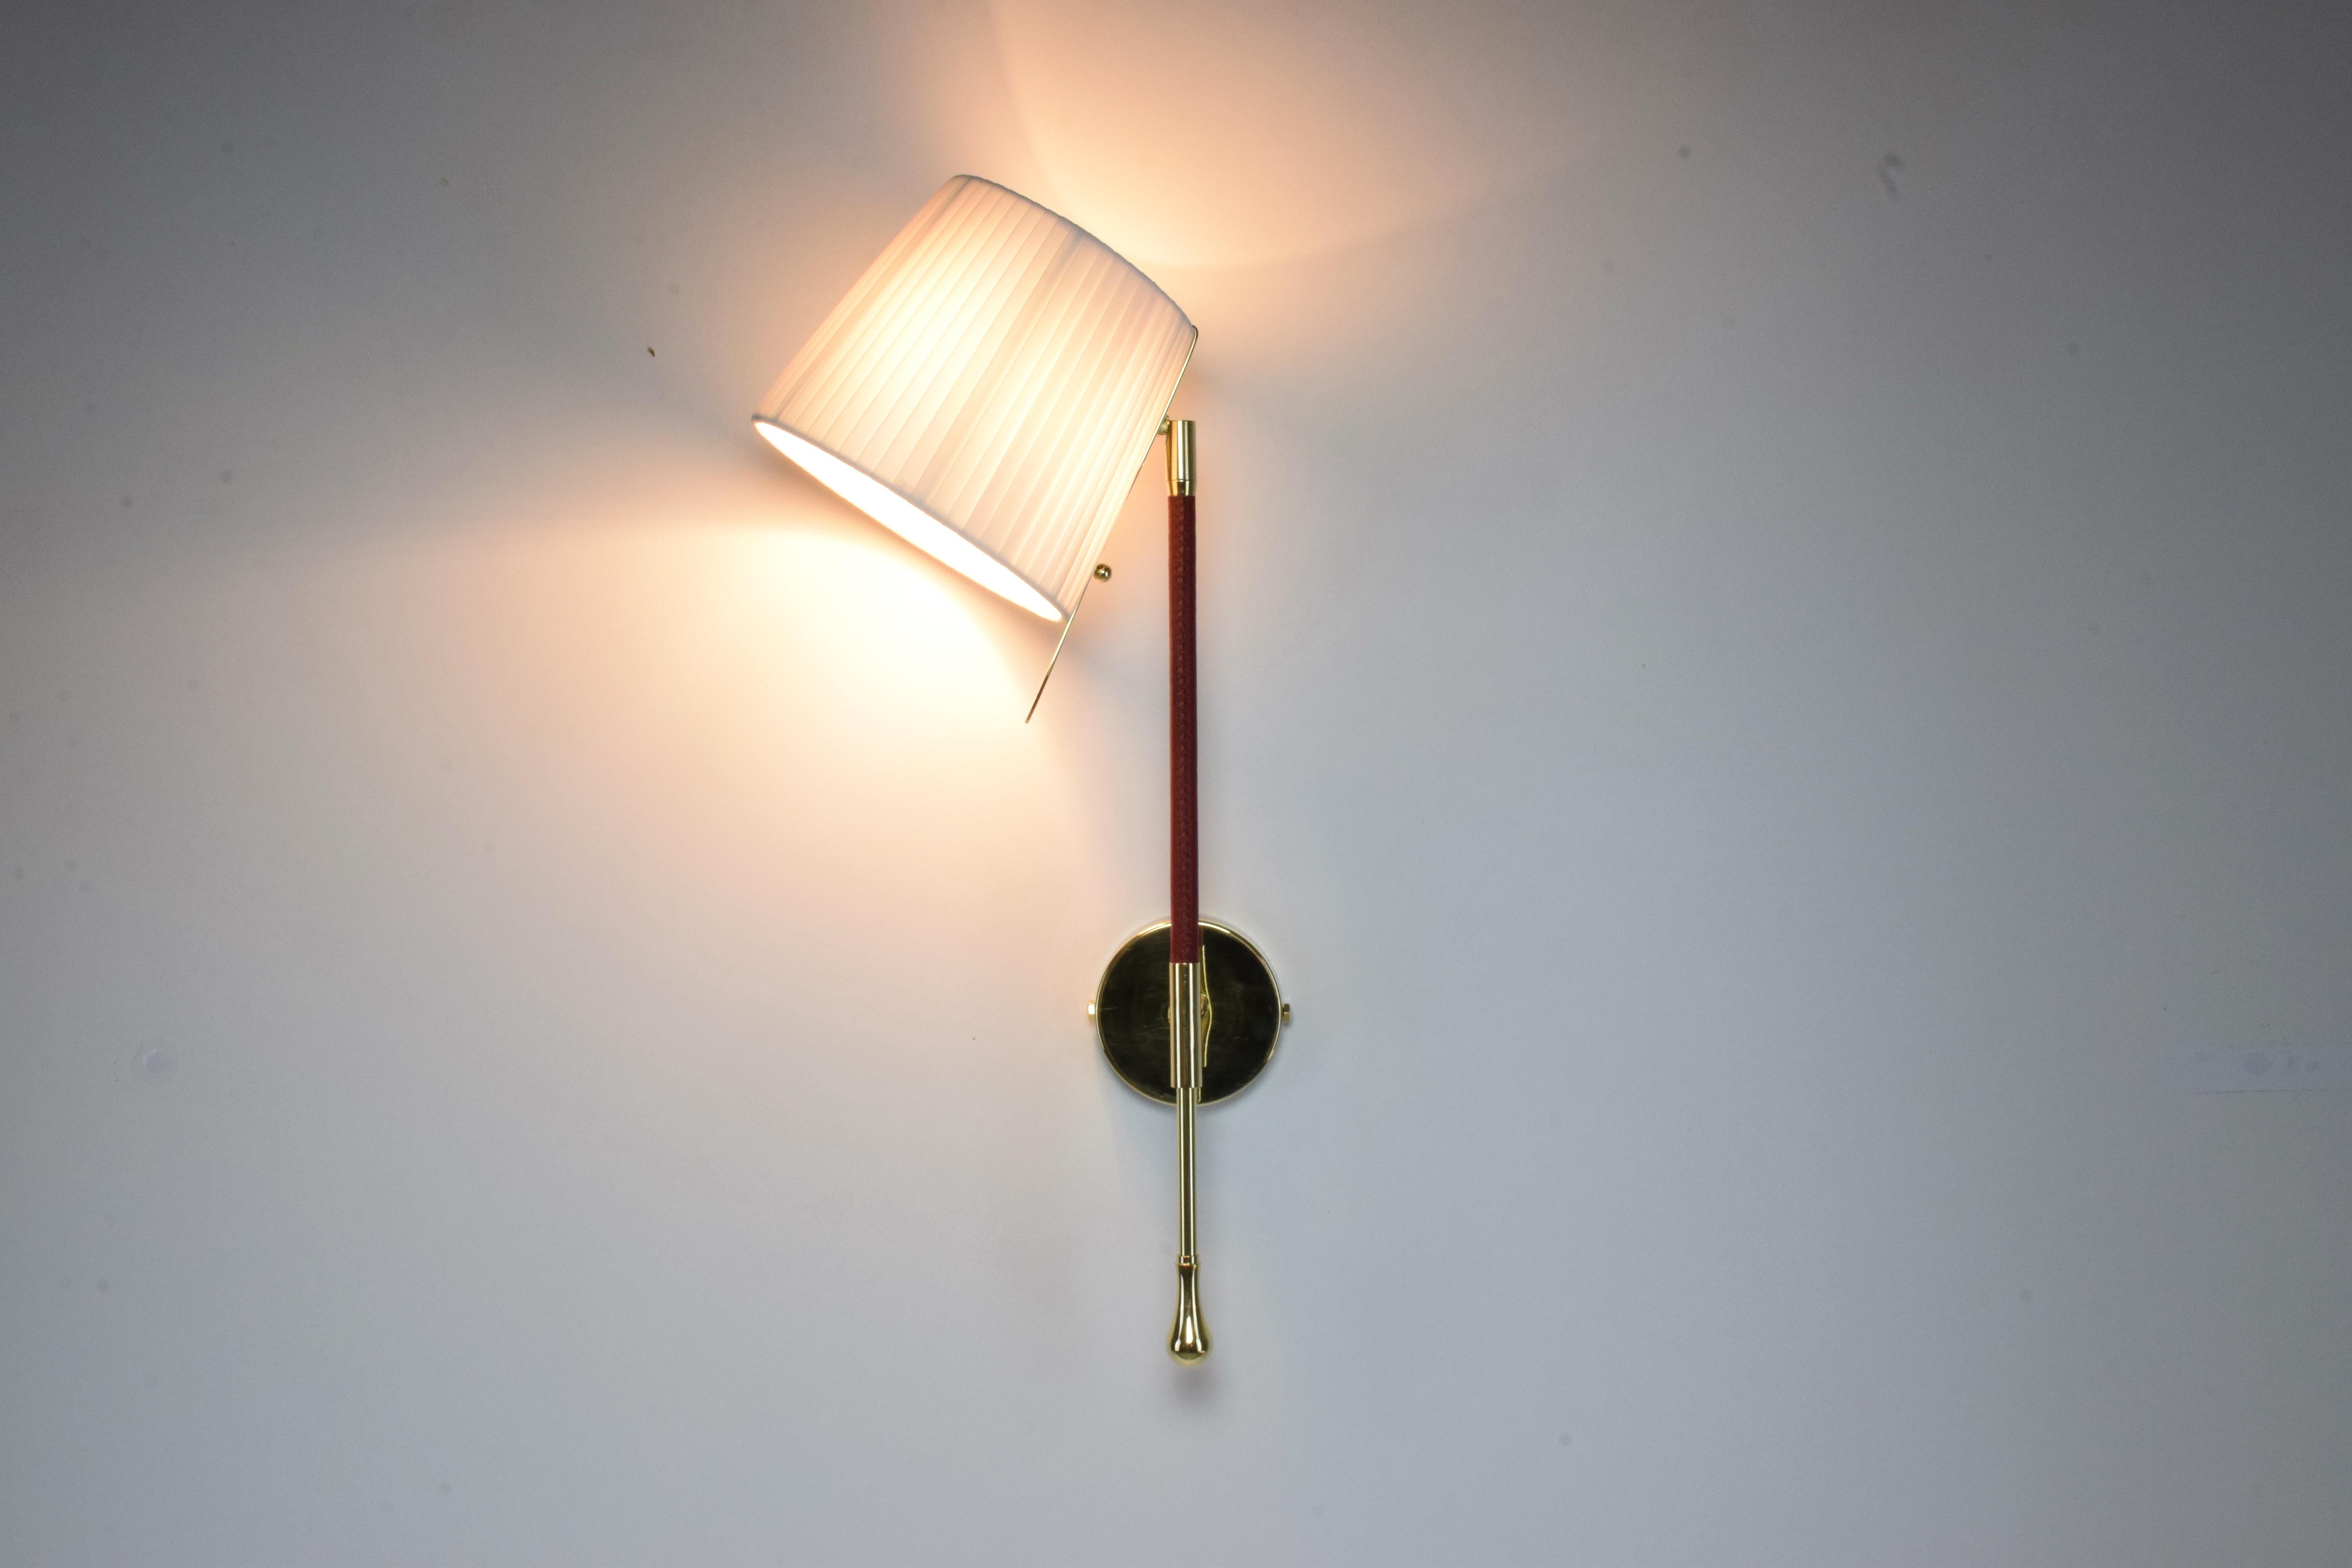 Ancora-W1 Contemporary Articulating Brass Wall Light, Flow Collection (Poliert) im Angebot